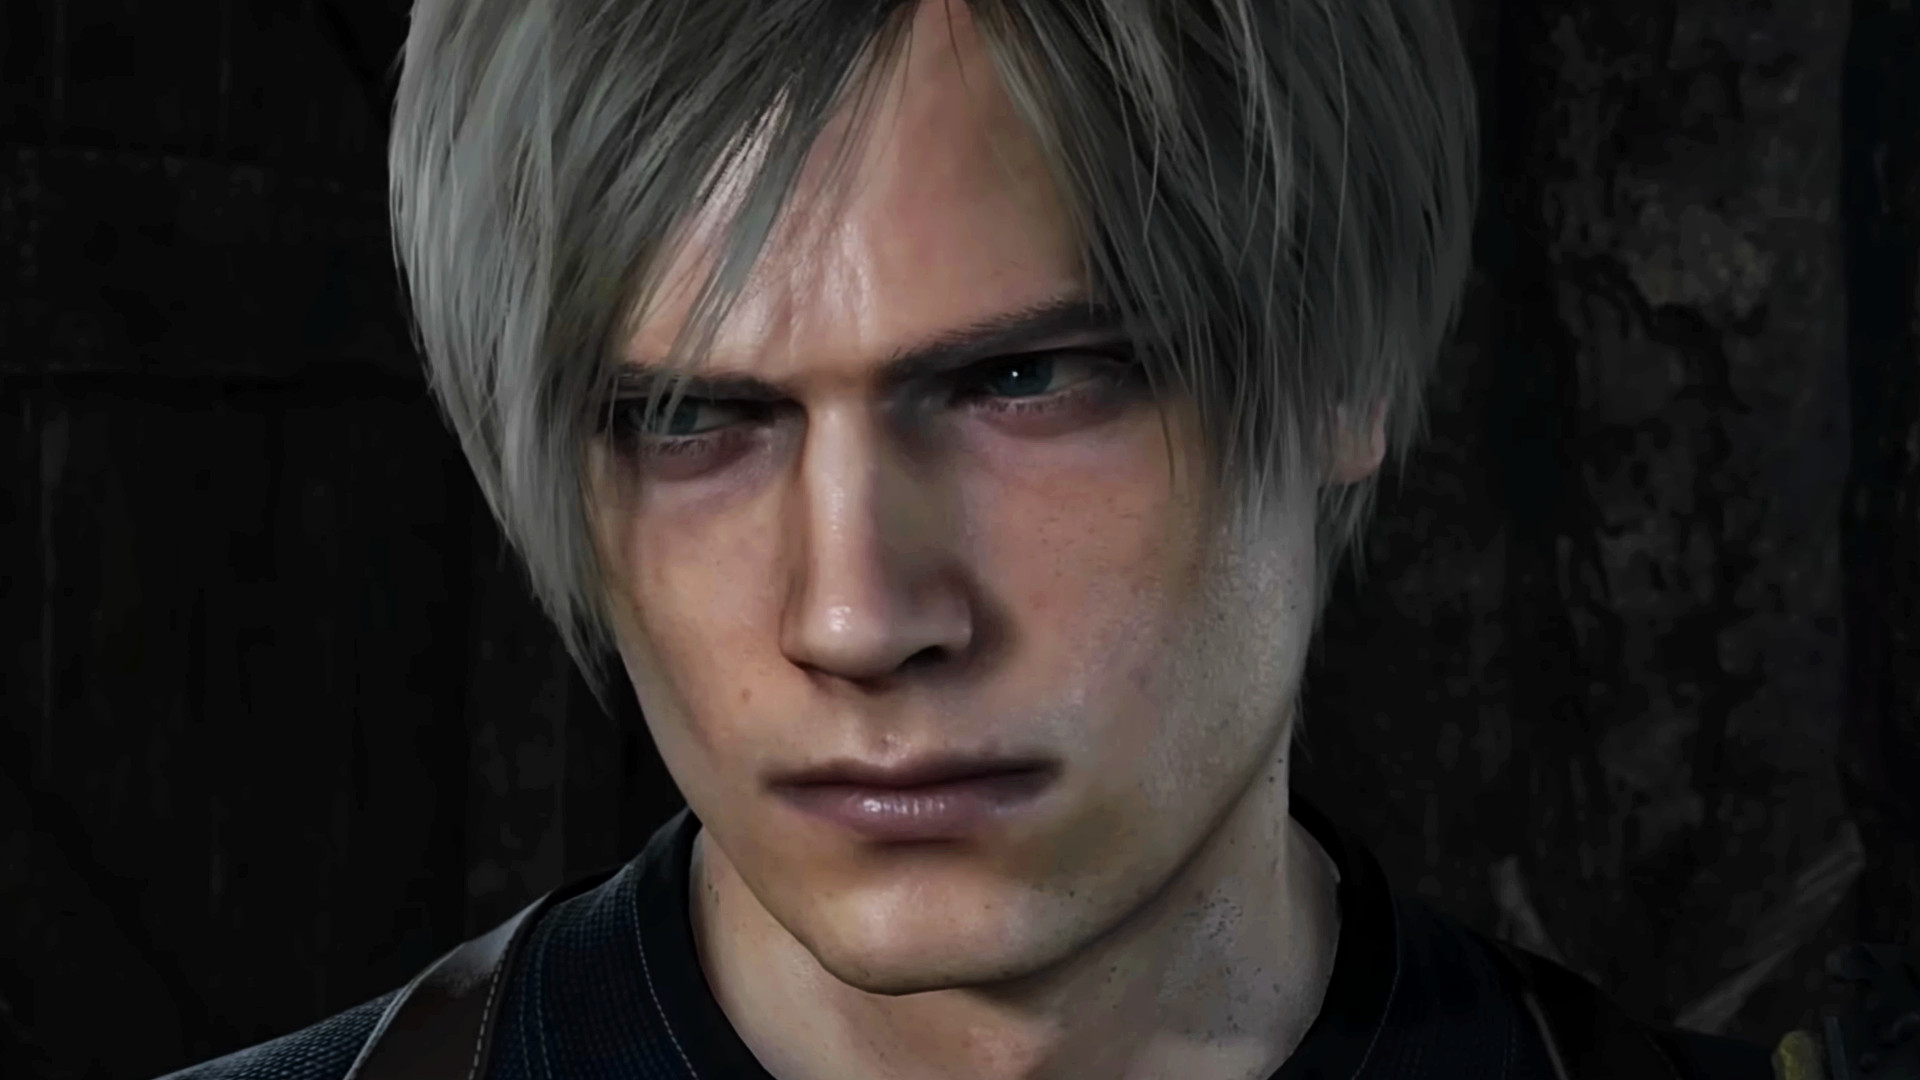 Resident Evil 4 sales soar, cementing it as the king of horror games